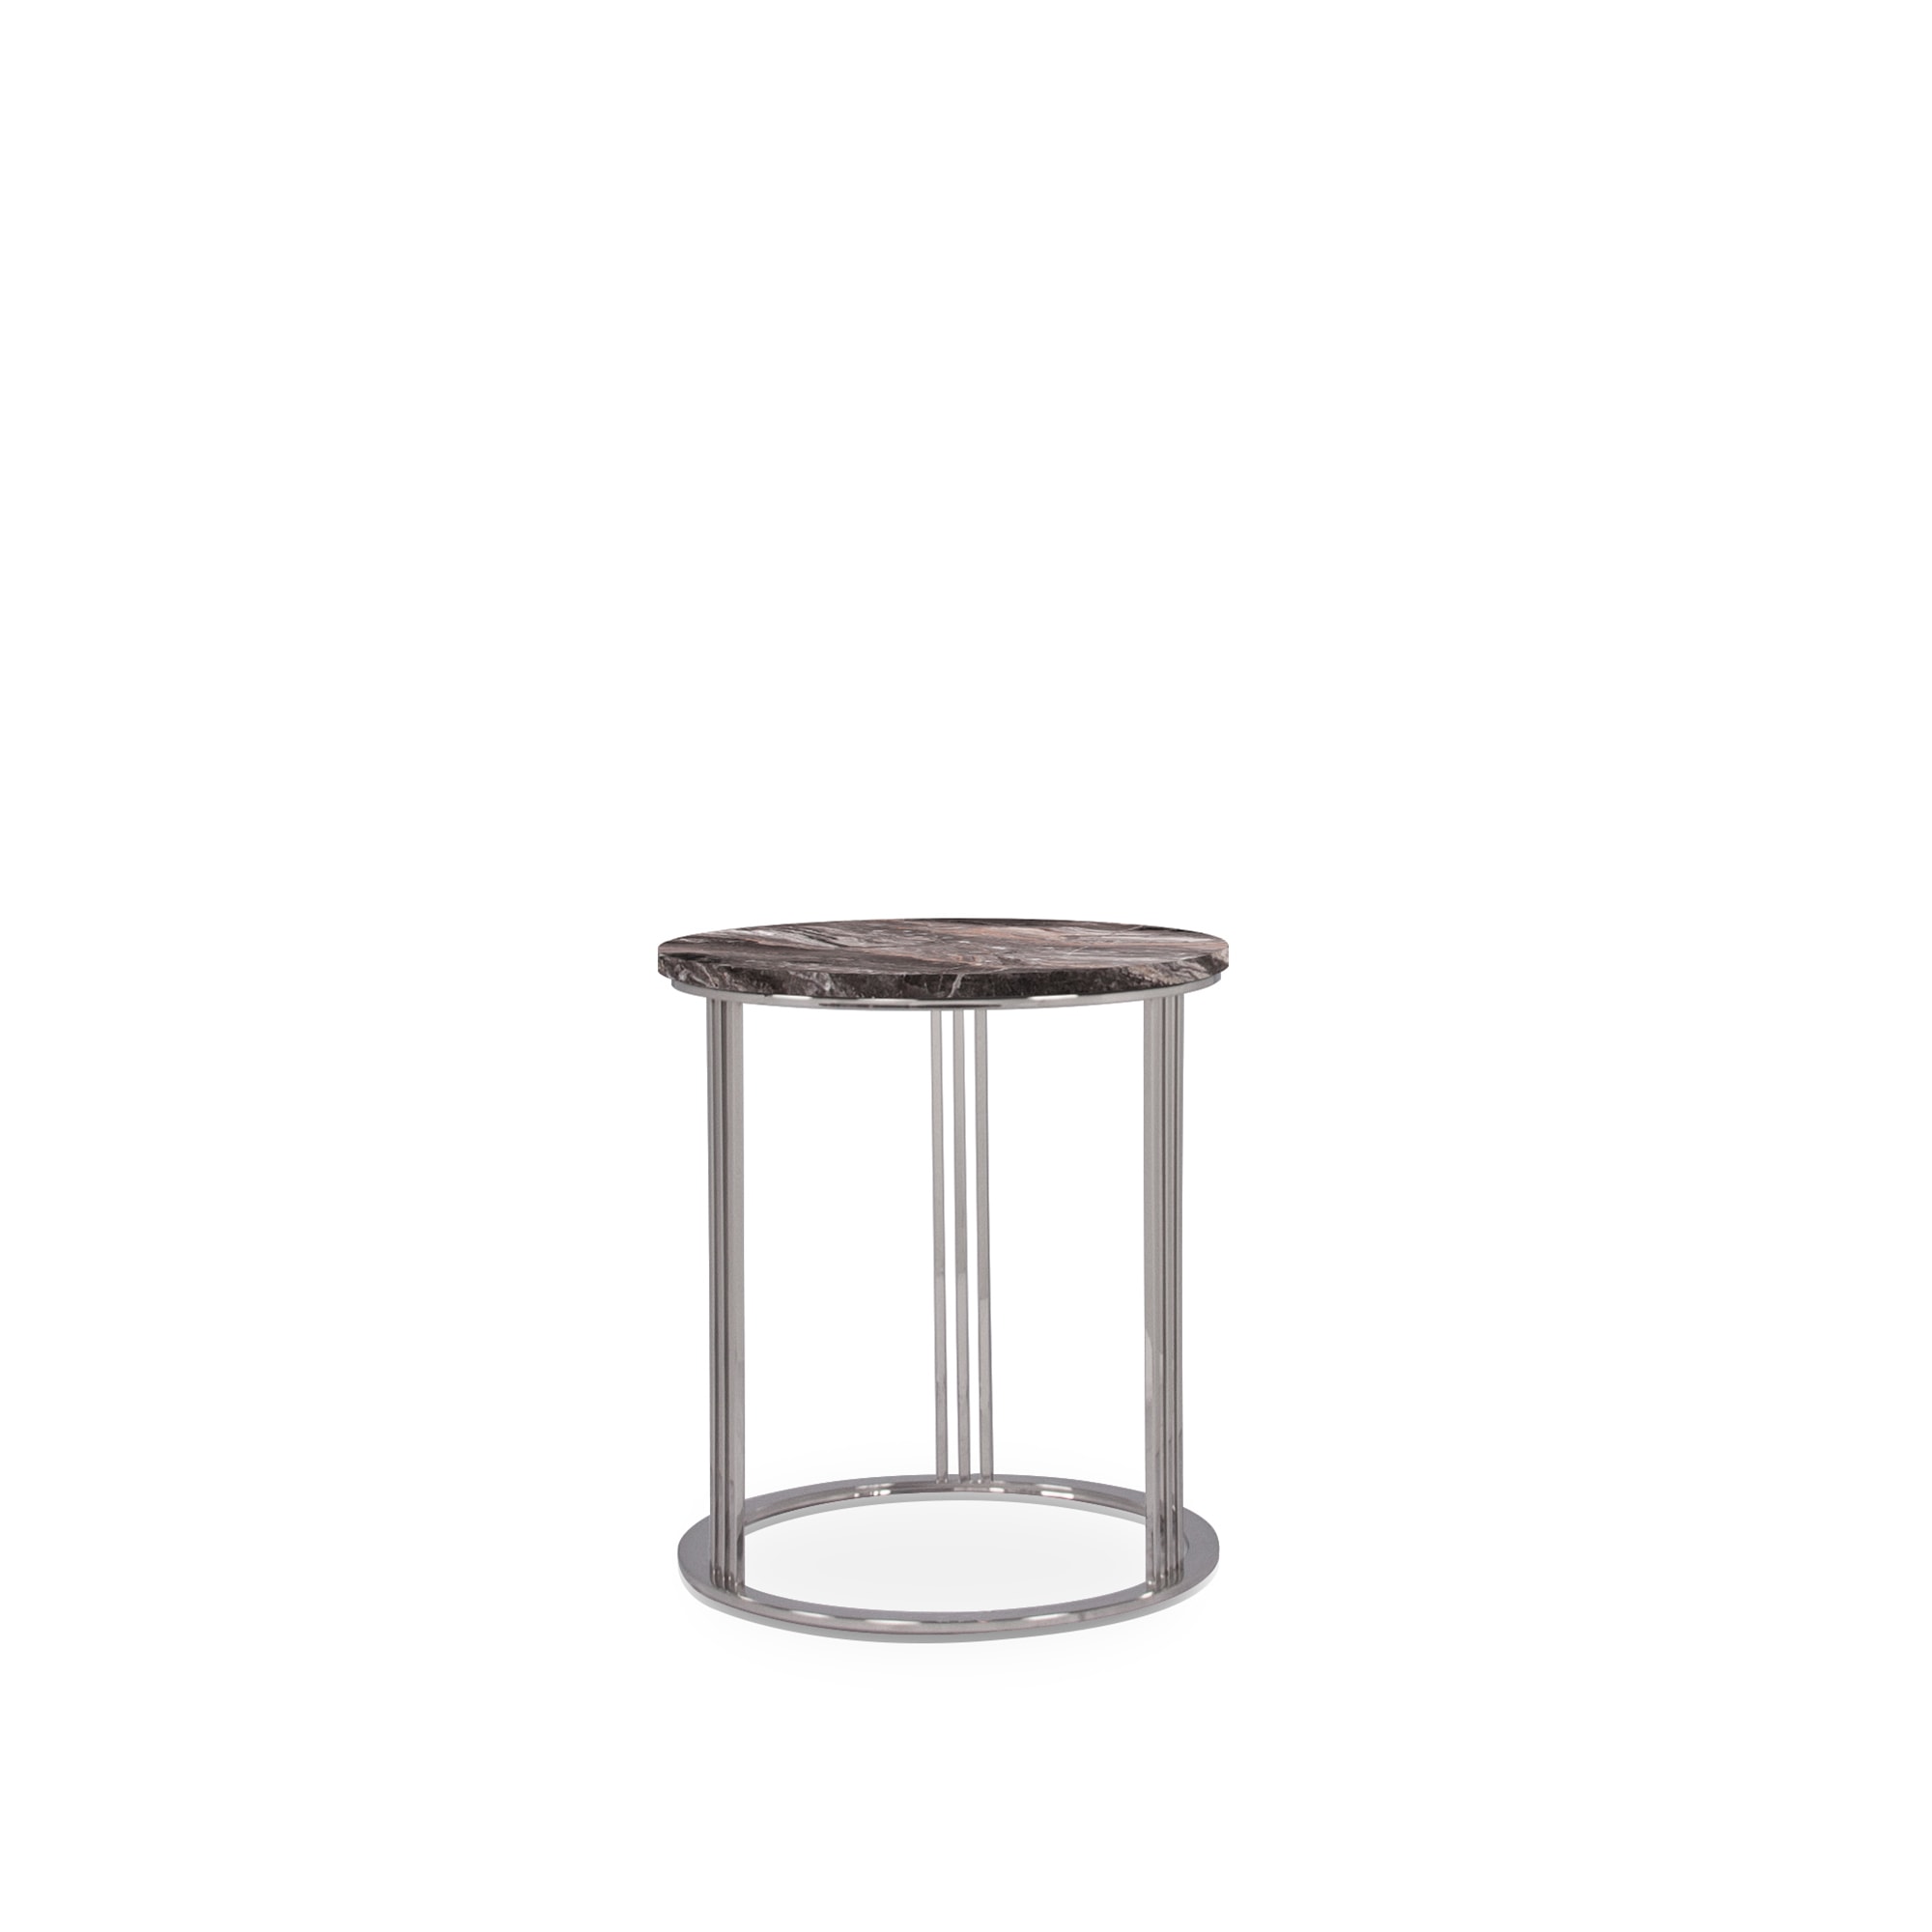 PAXTON S | Decasa Marble Marble Dining Table